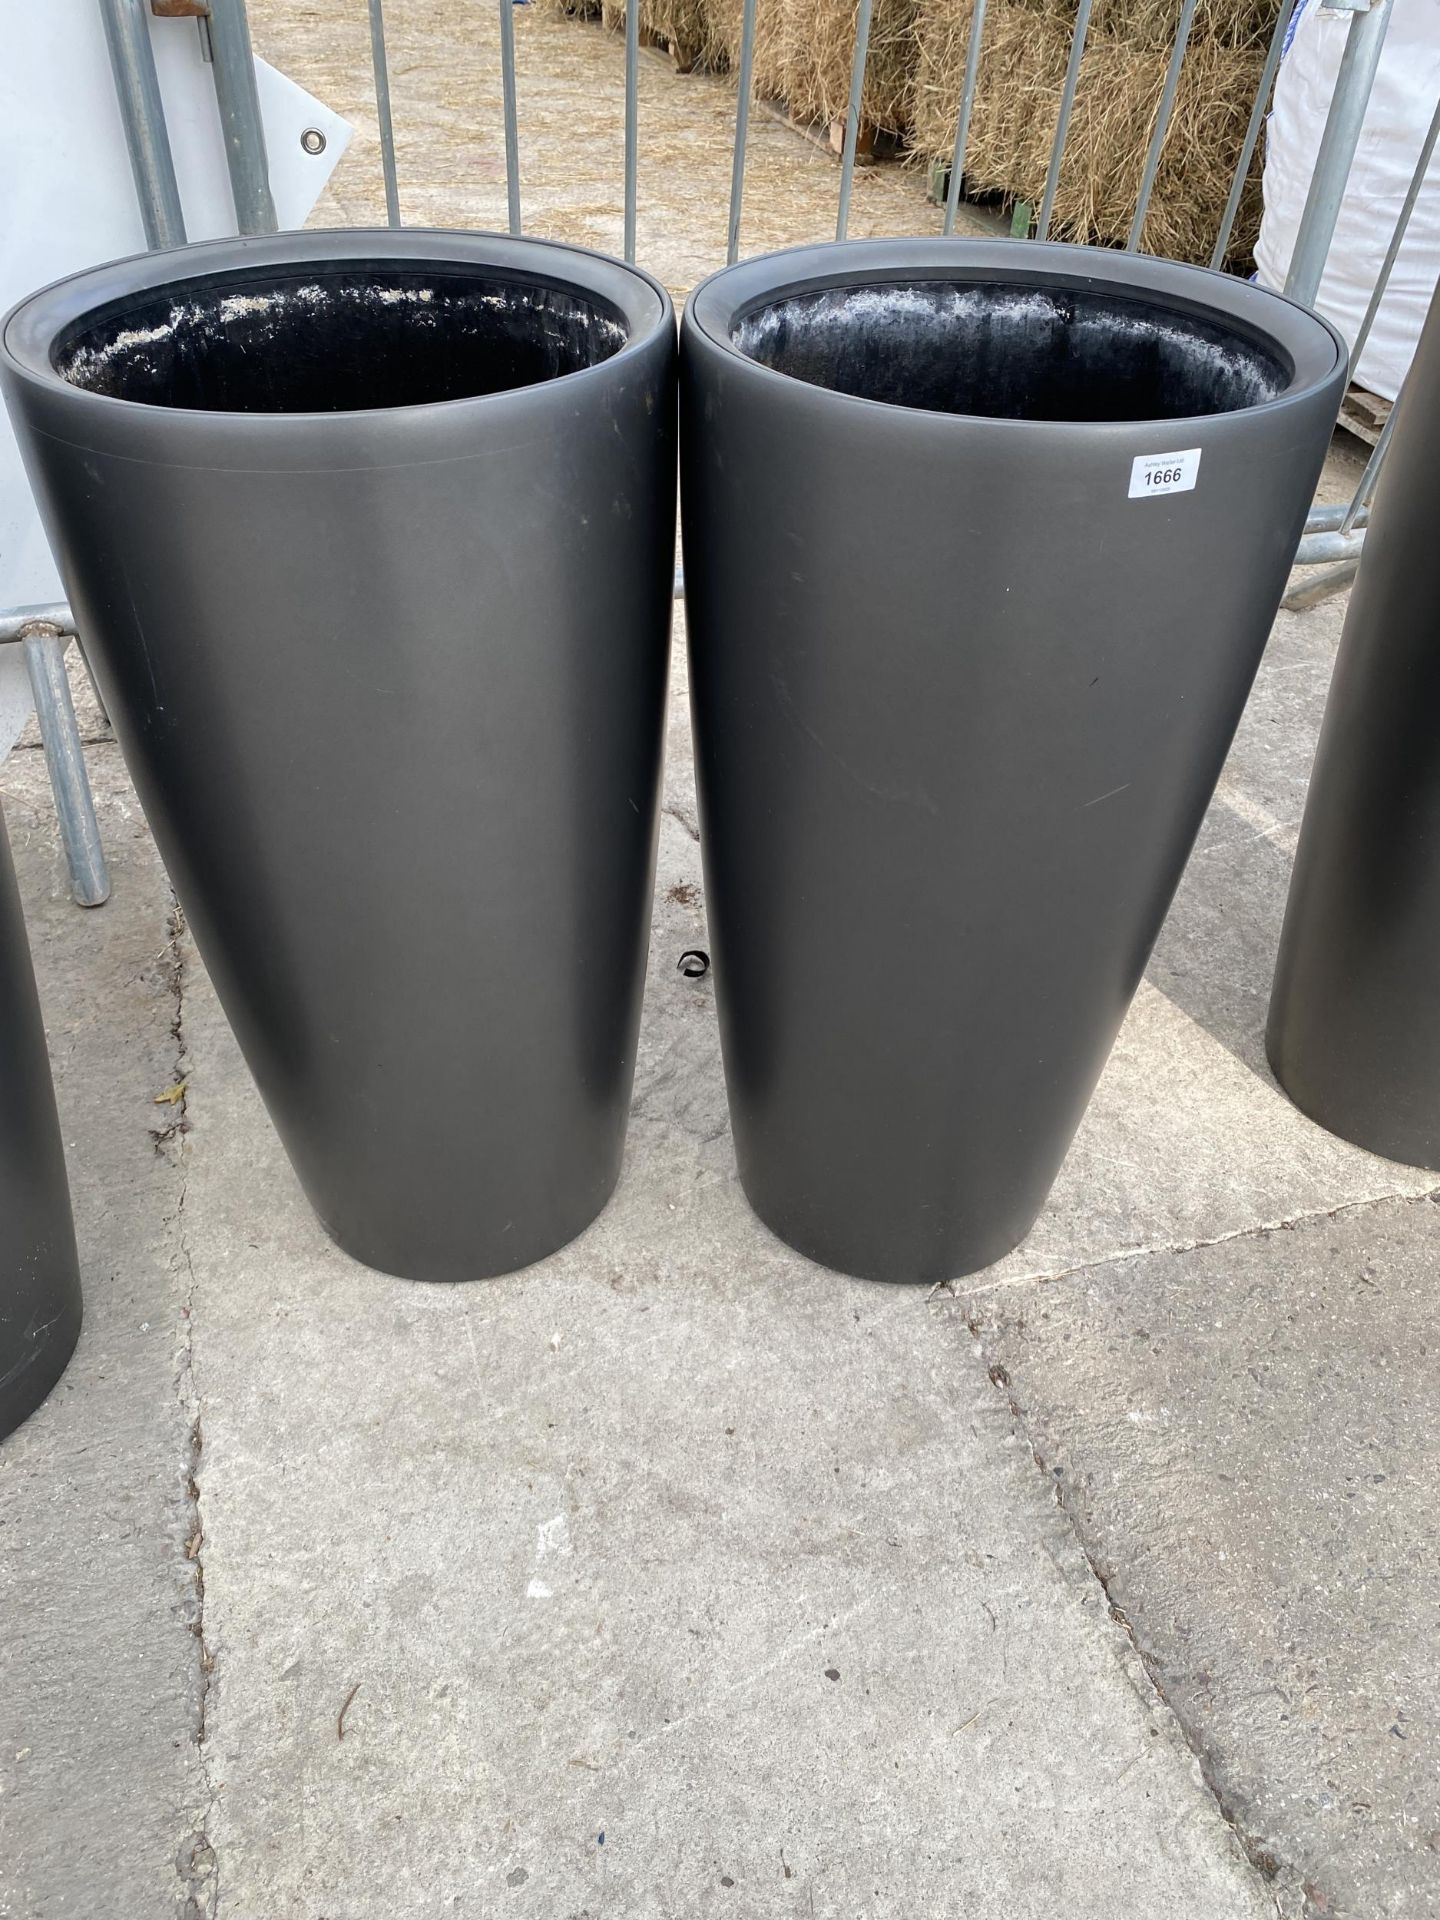 A PAIR OF MODERN LECHUZA FIBRE GLASS INDOOR/OUTDOOR PLANTERS COMPLETE WITH INSERTS (H:75CM)